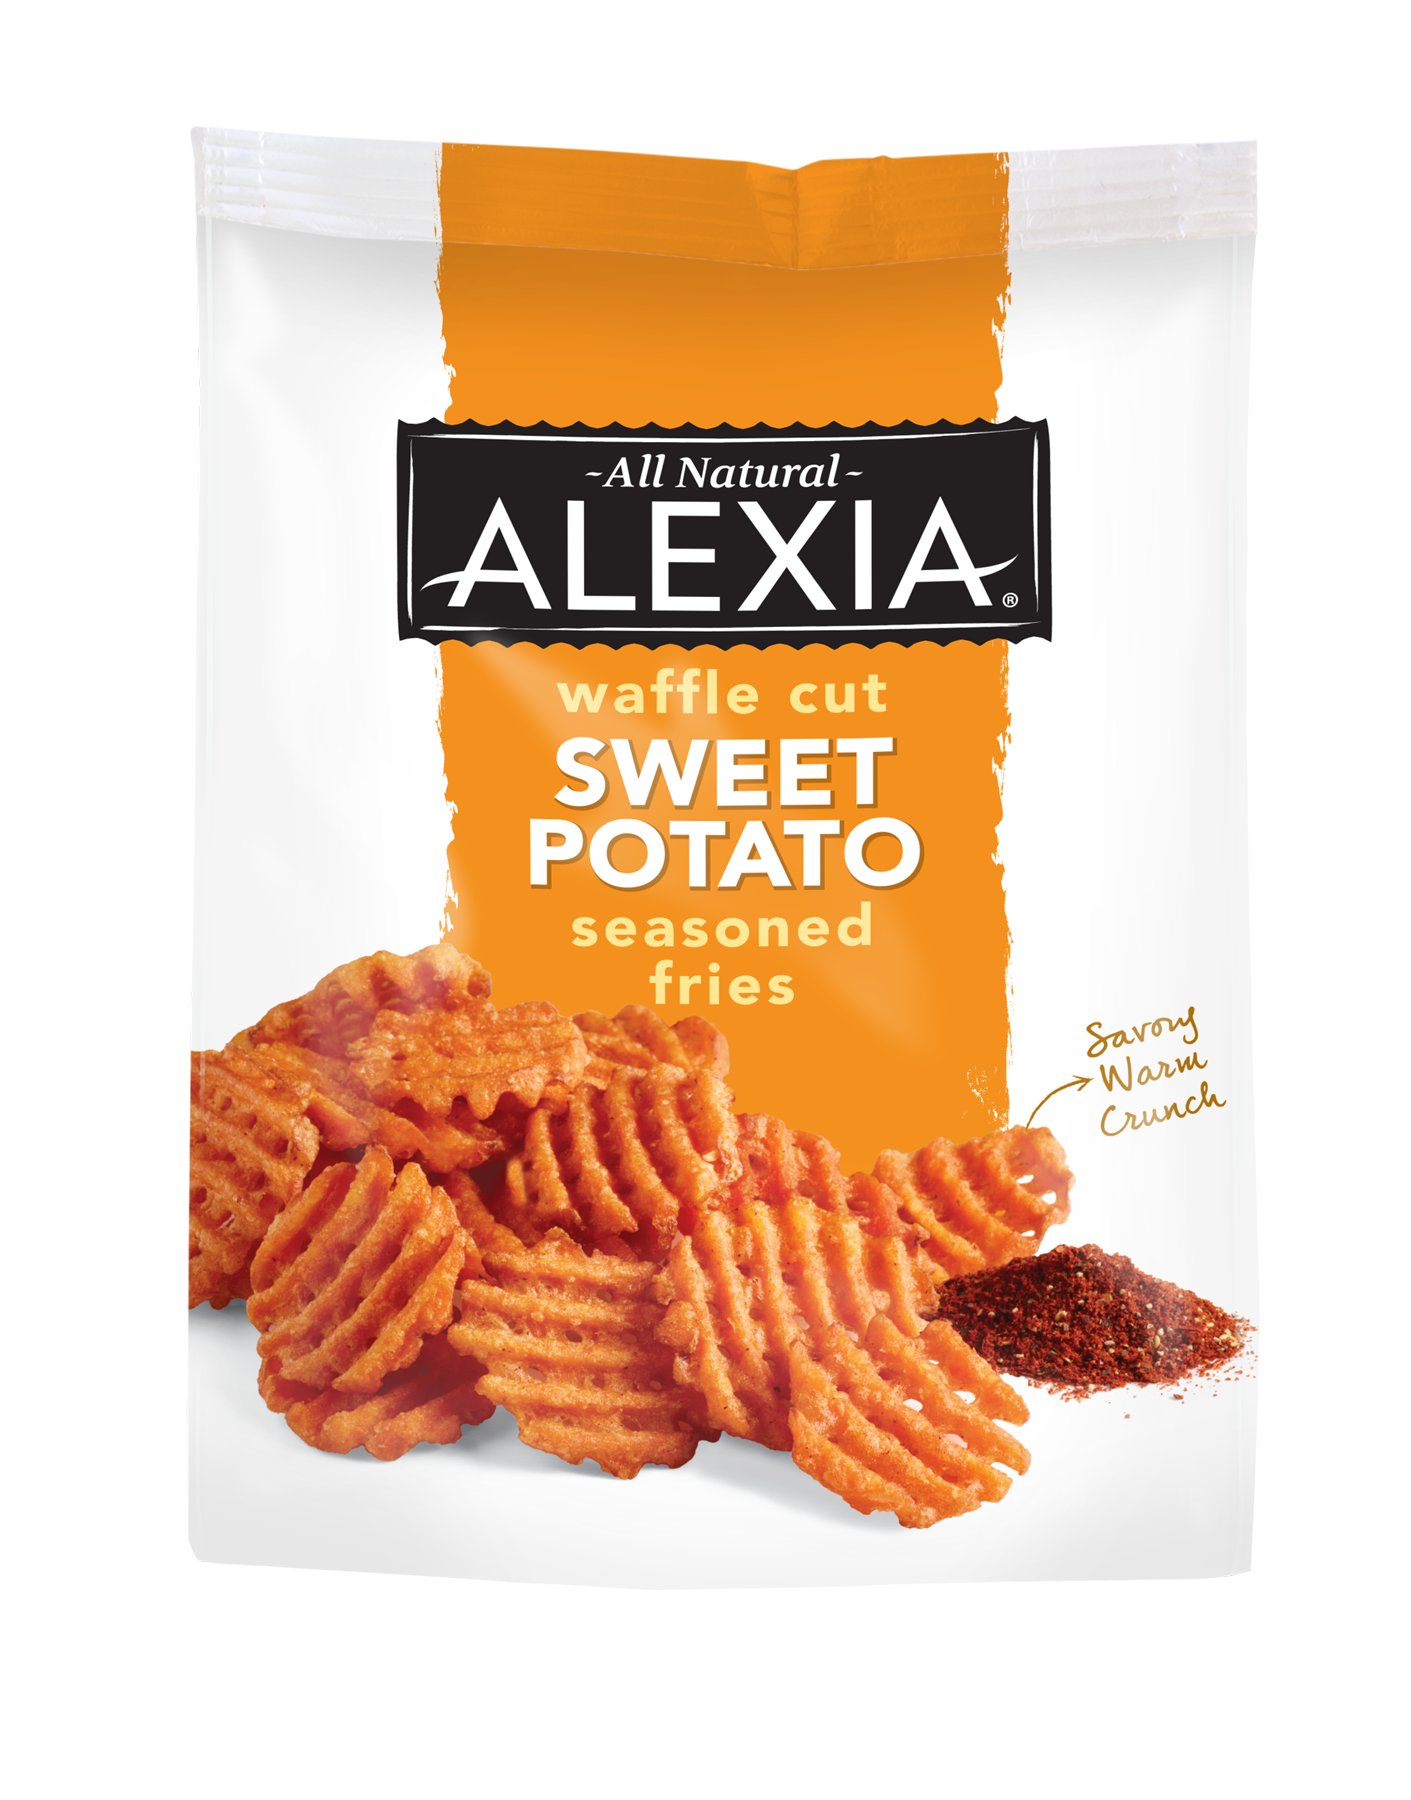 Awesome Alexia Spicy Sweet Potato Fries Air Fryer wallpapers to download fo...